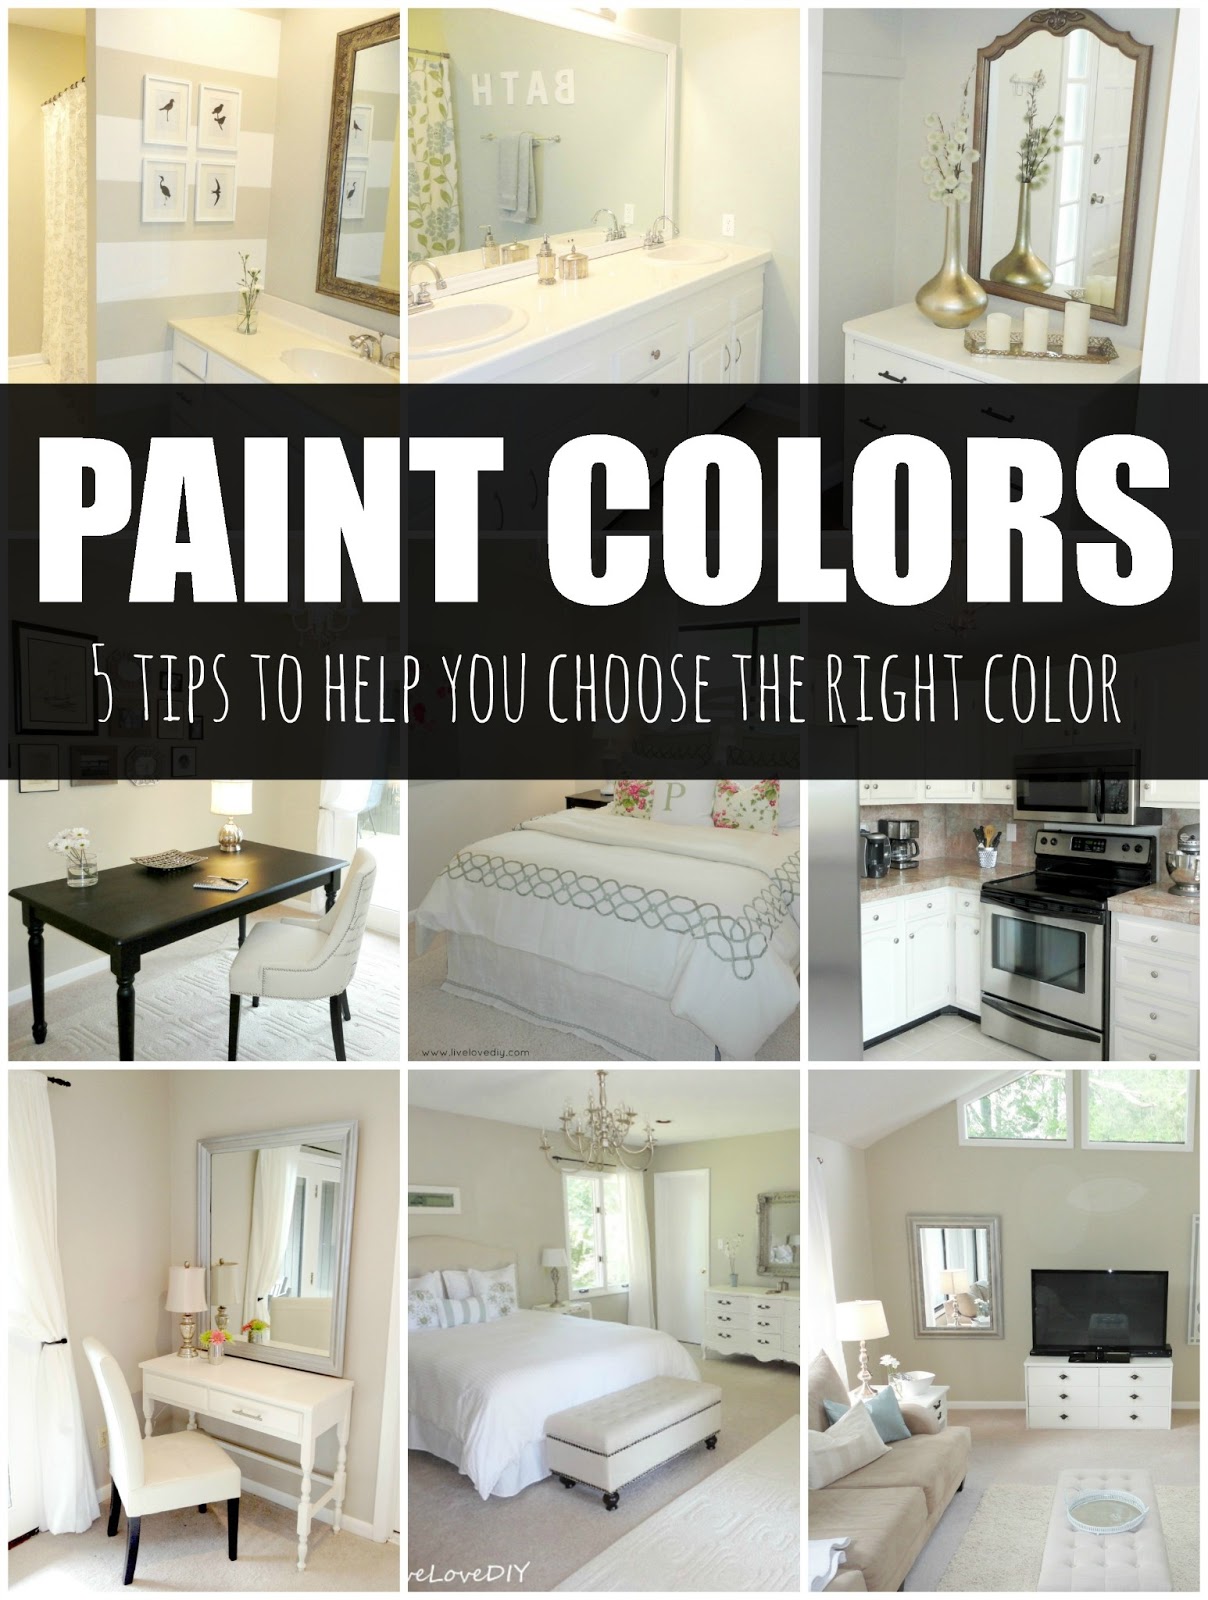 LiveLoveDIY: How To Choose Paint Colors: 5 Tips To Help You Decide